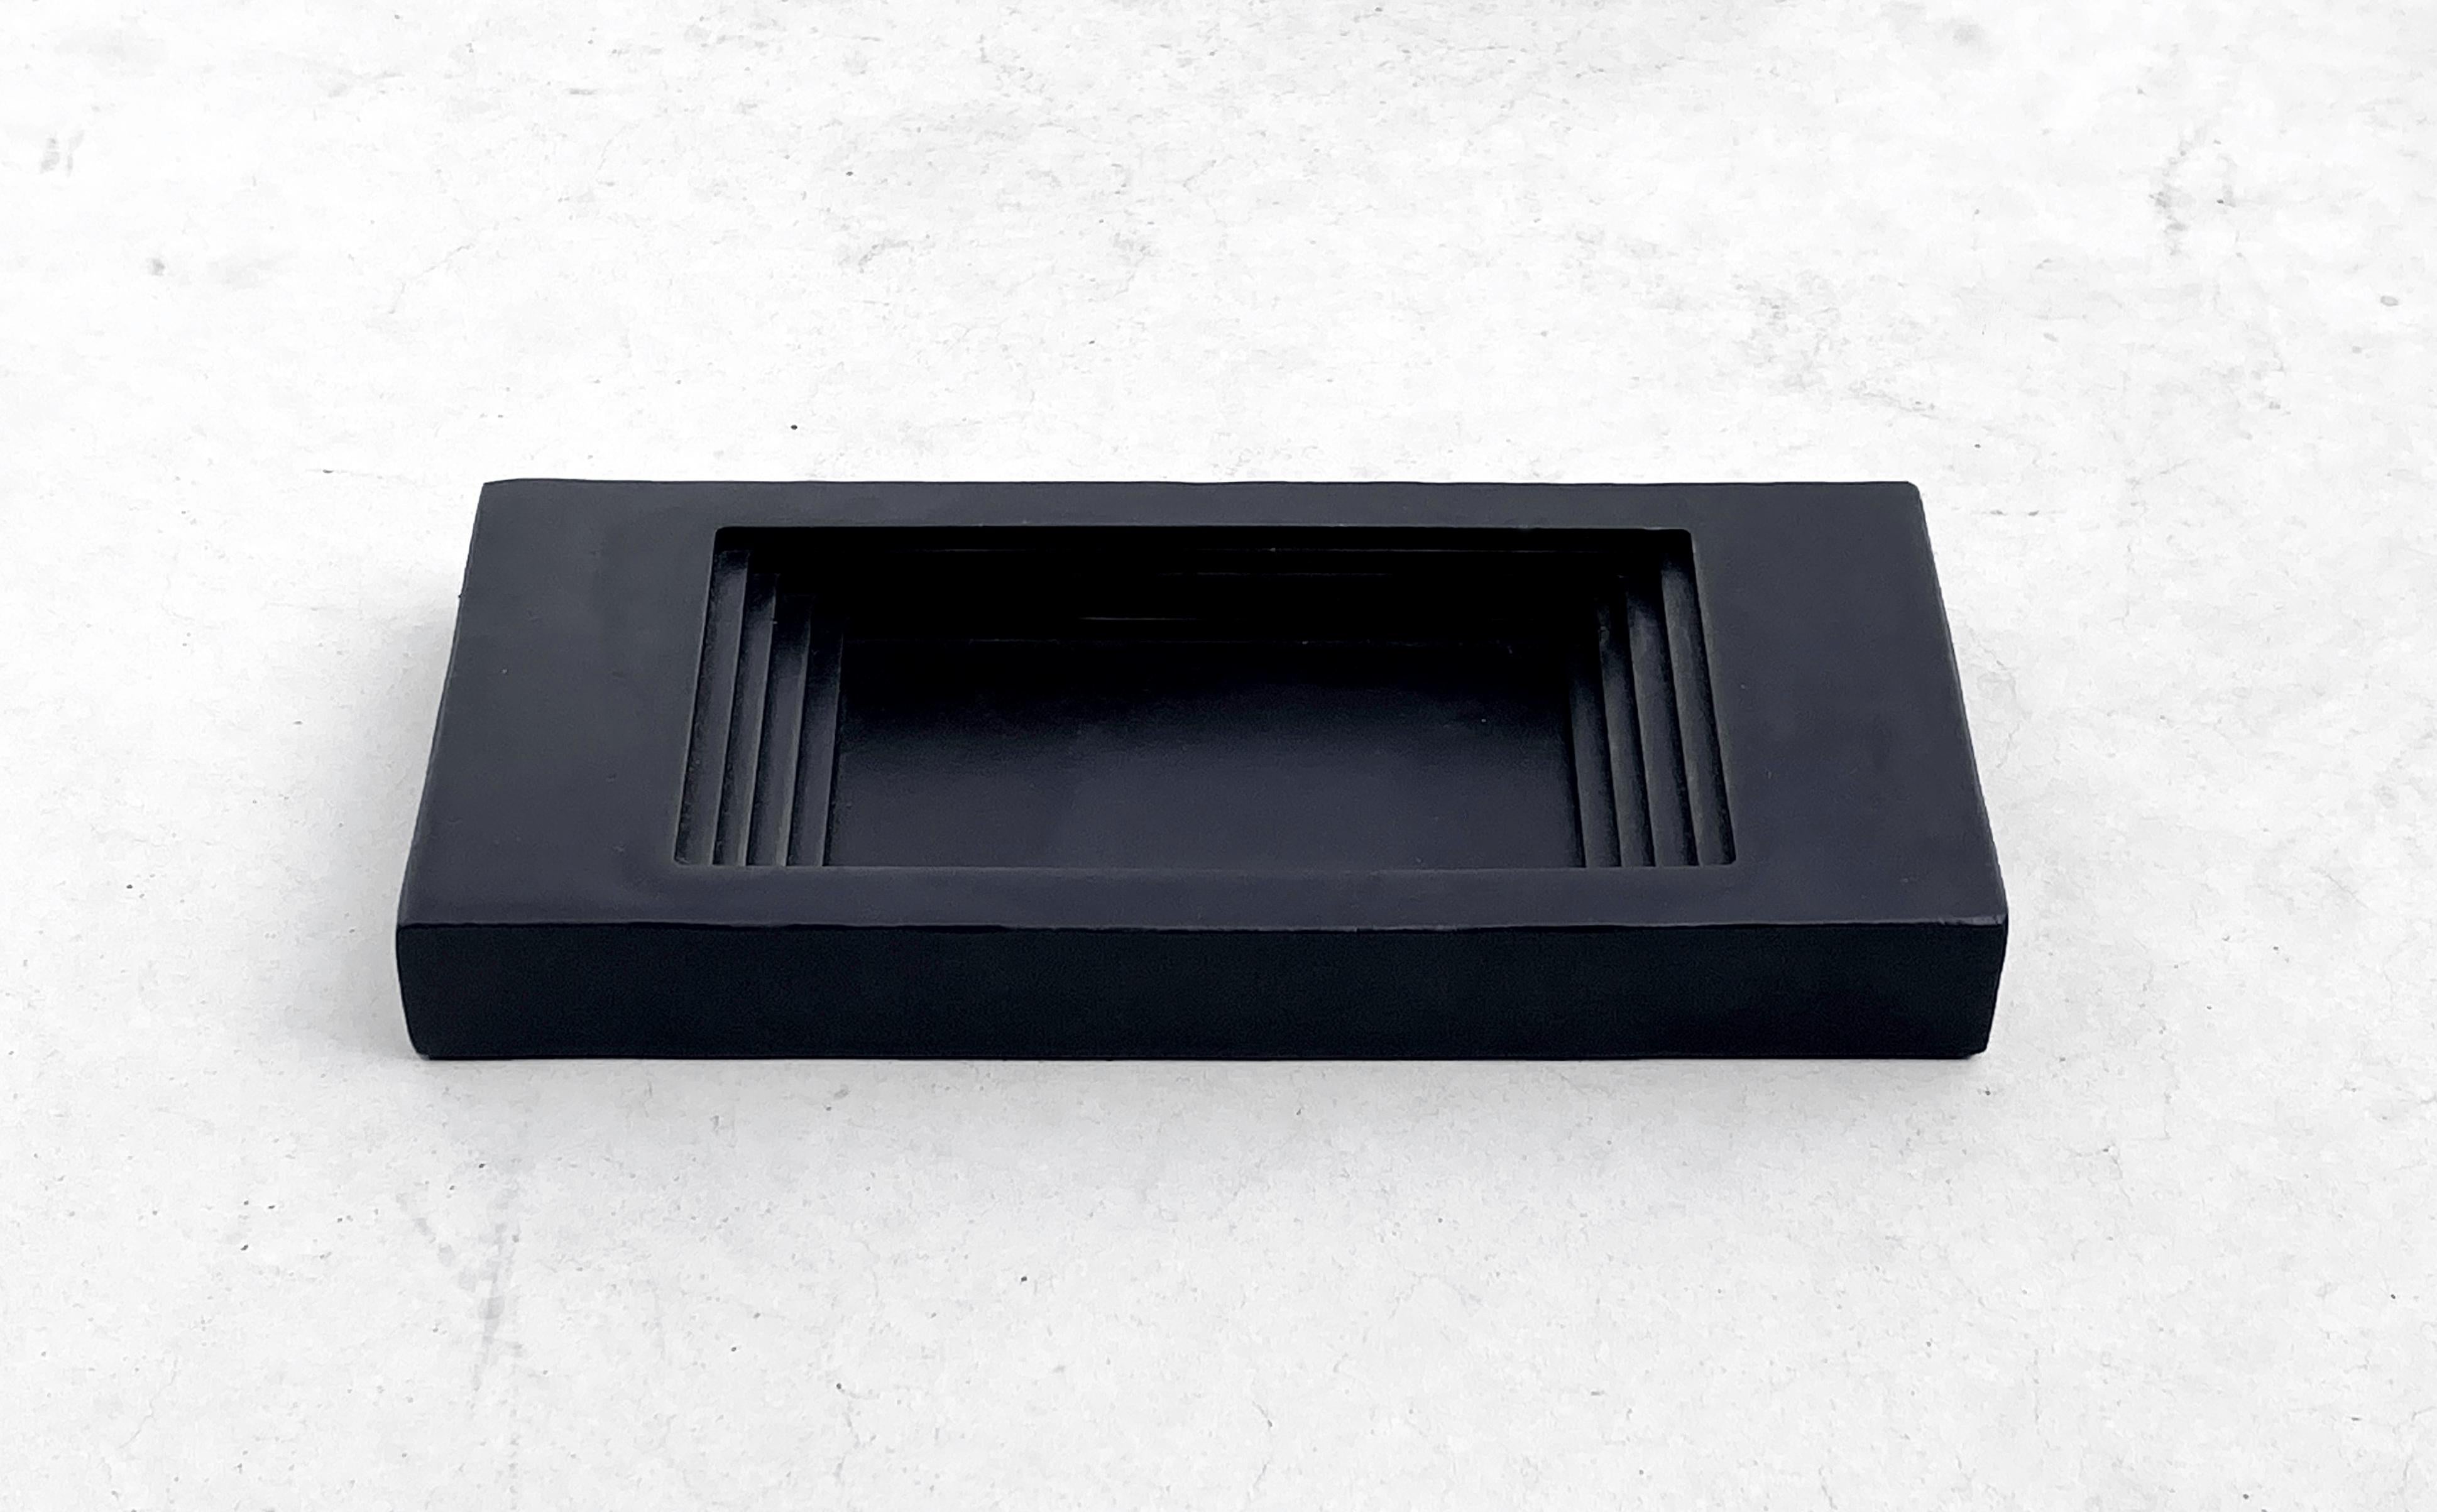 Fall Blackened Ashtray by Cal Summers
Dimension:  D 6.9  x W 15.2 x H 2 cm 
Materials: Stainless Steel 

Cal Summers is a British designer who makes bespoke handmade furniture and contemporary artefacts in which he challenges the boundaries of